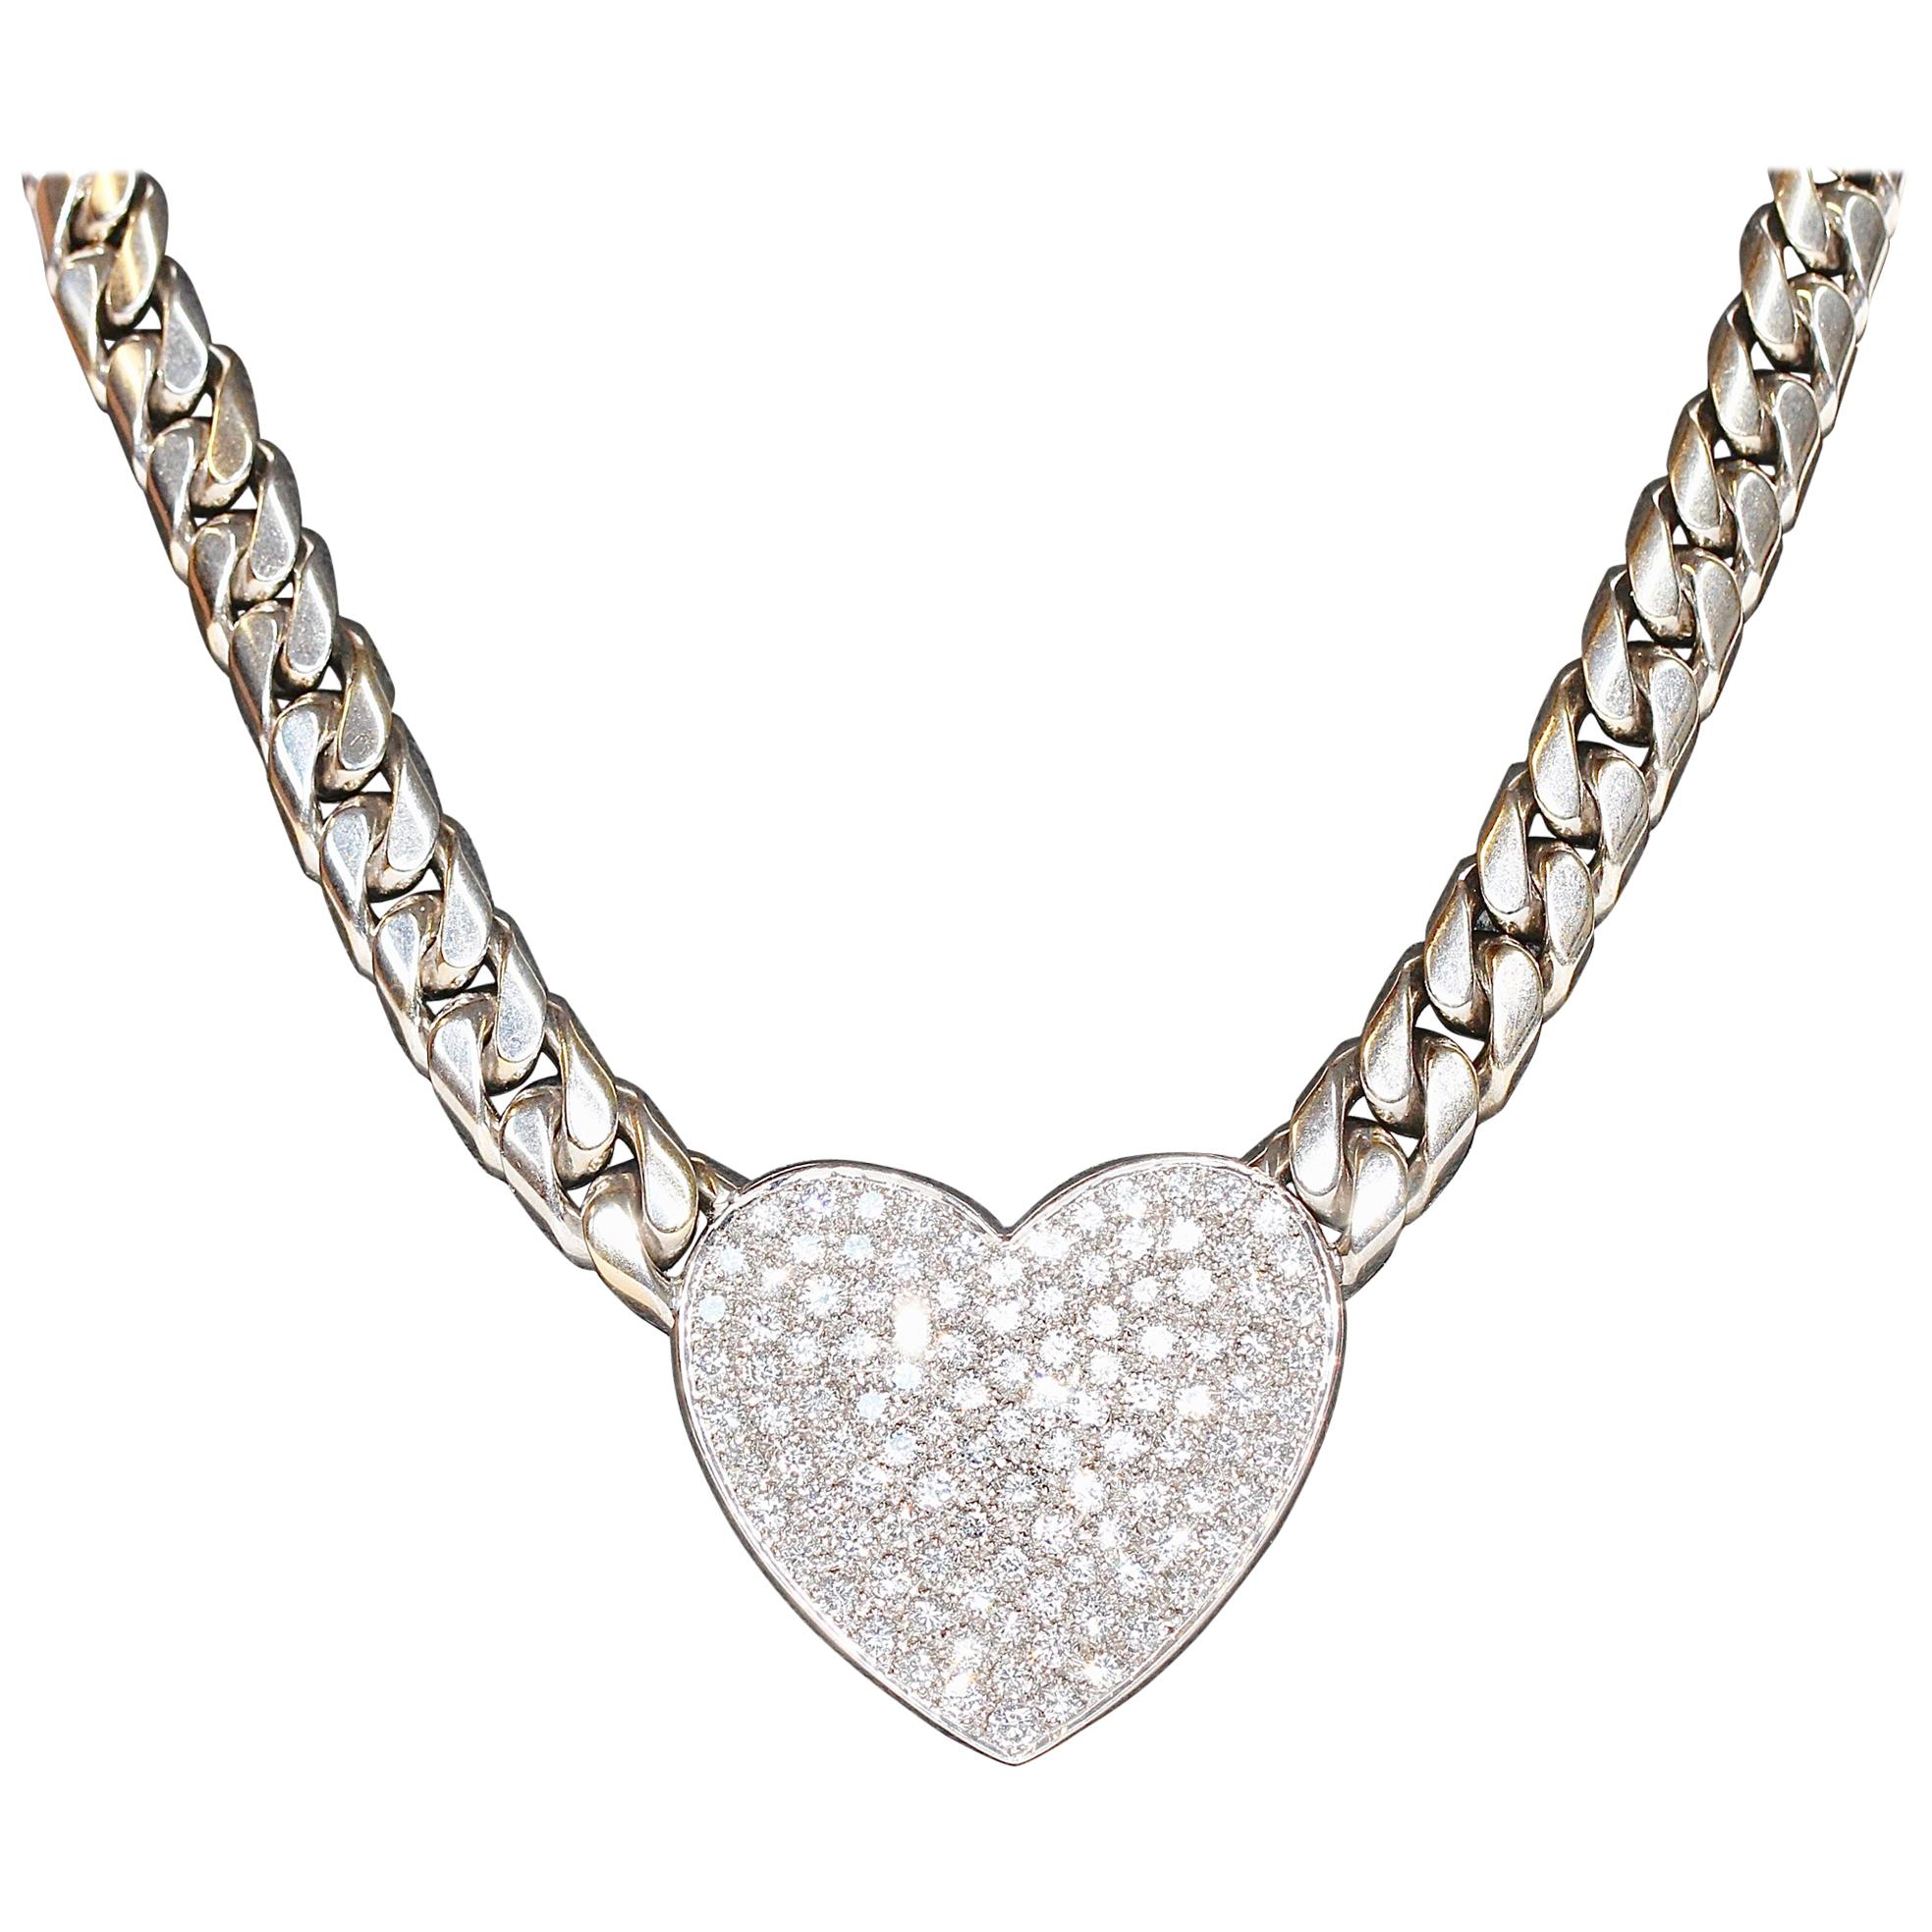 Luxury and Heavy 18 Karat White Gold Necklace with 120 Diamonds, Heart Shape